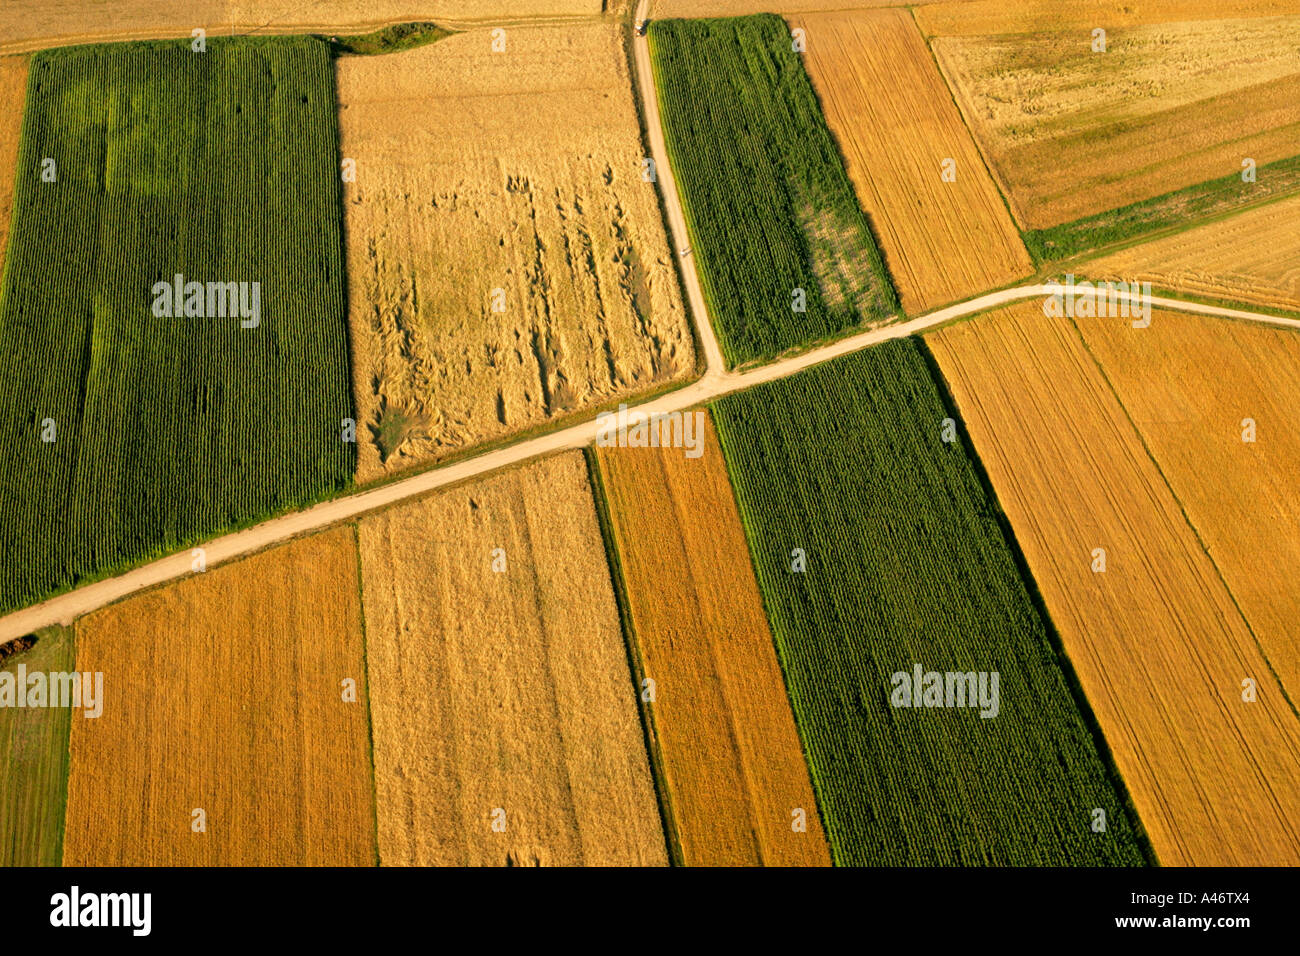 Agrarian country Stock Photo